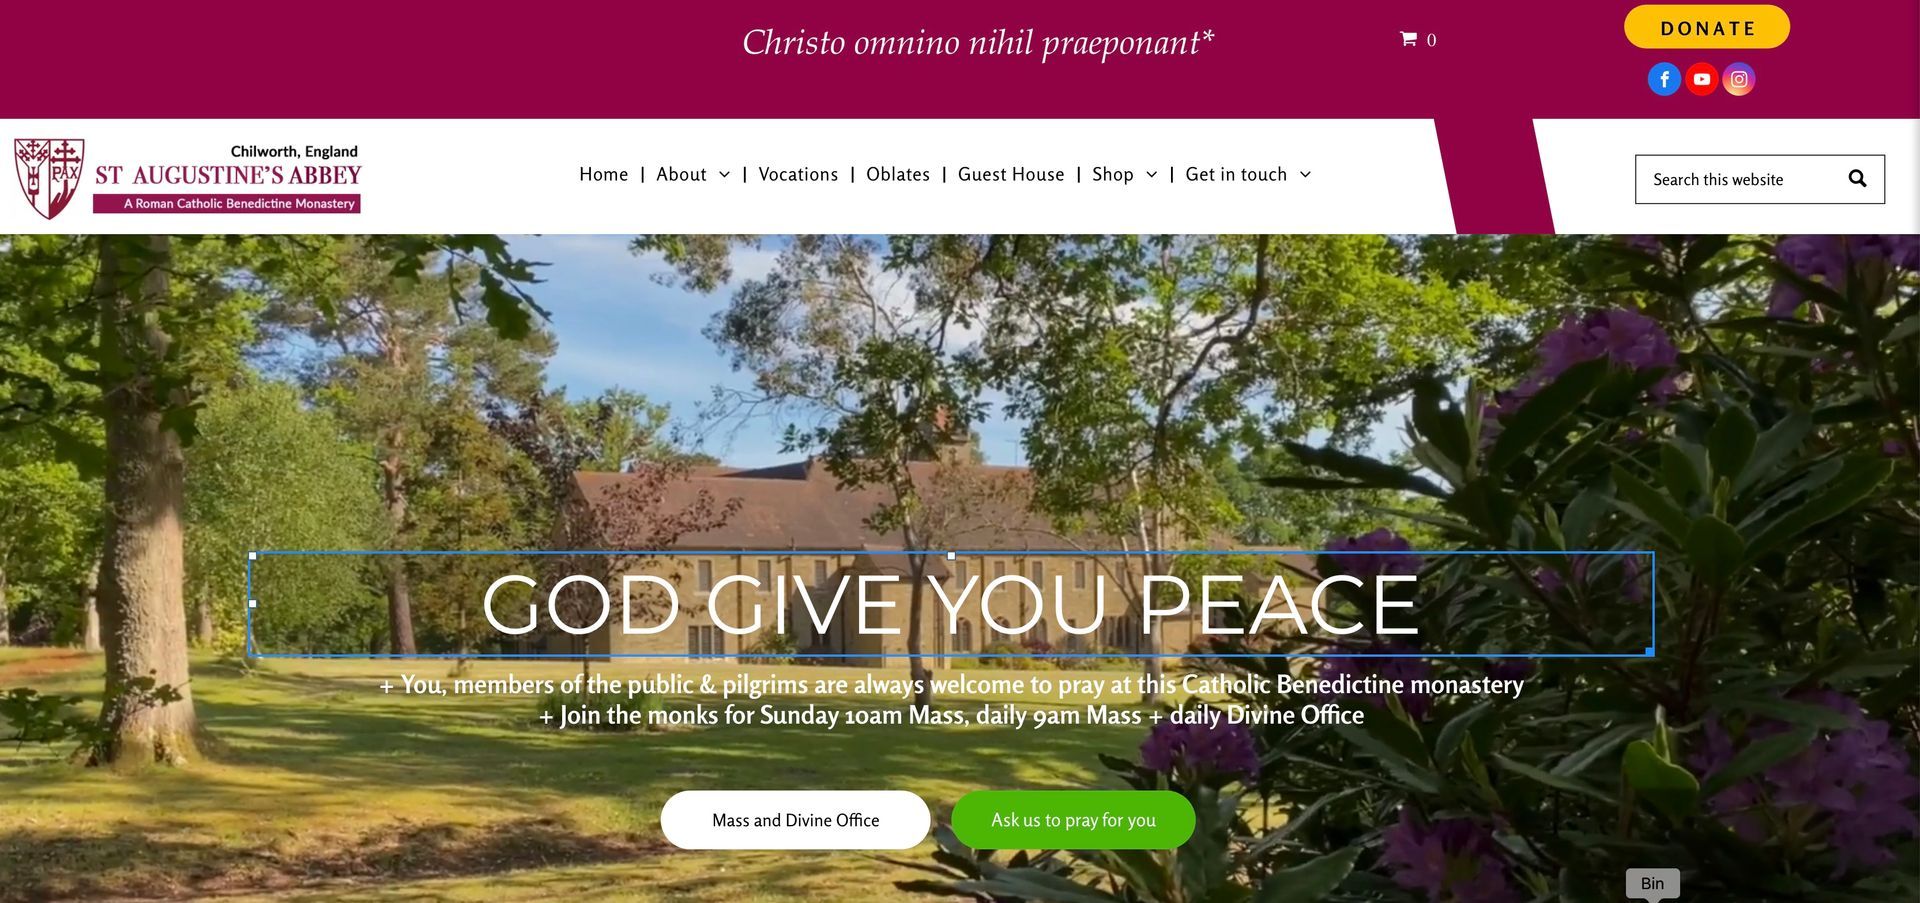 A screenshot of a website that says `` god give you peace ''.